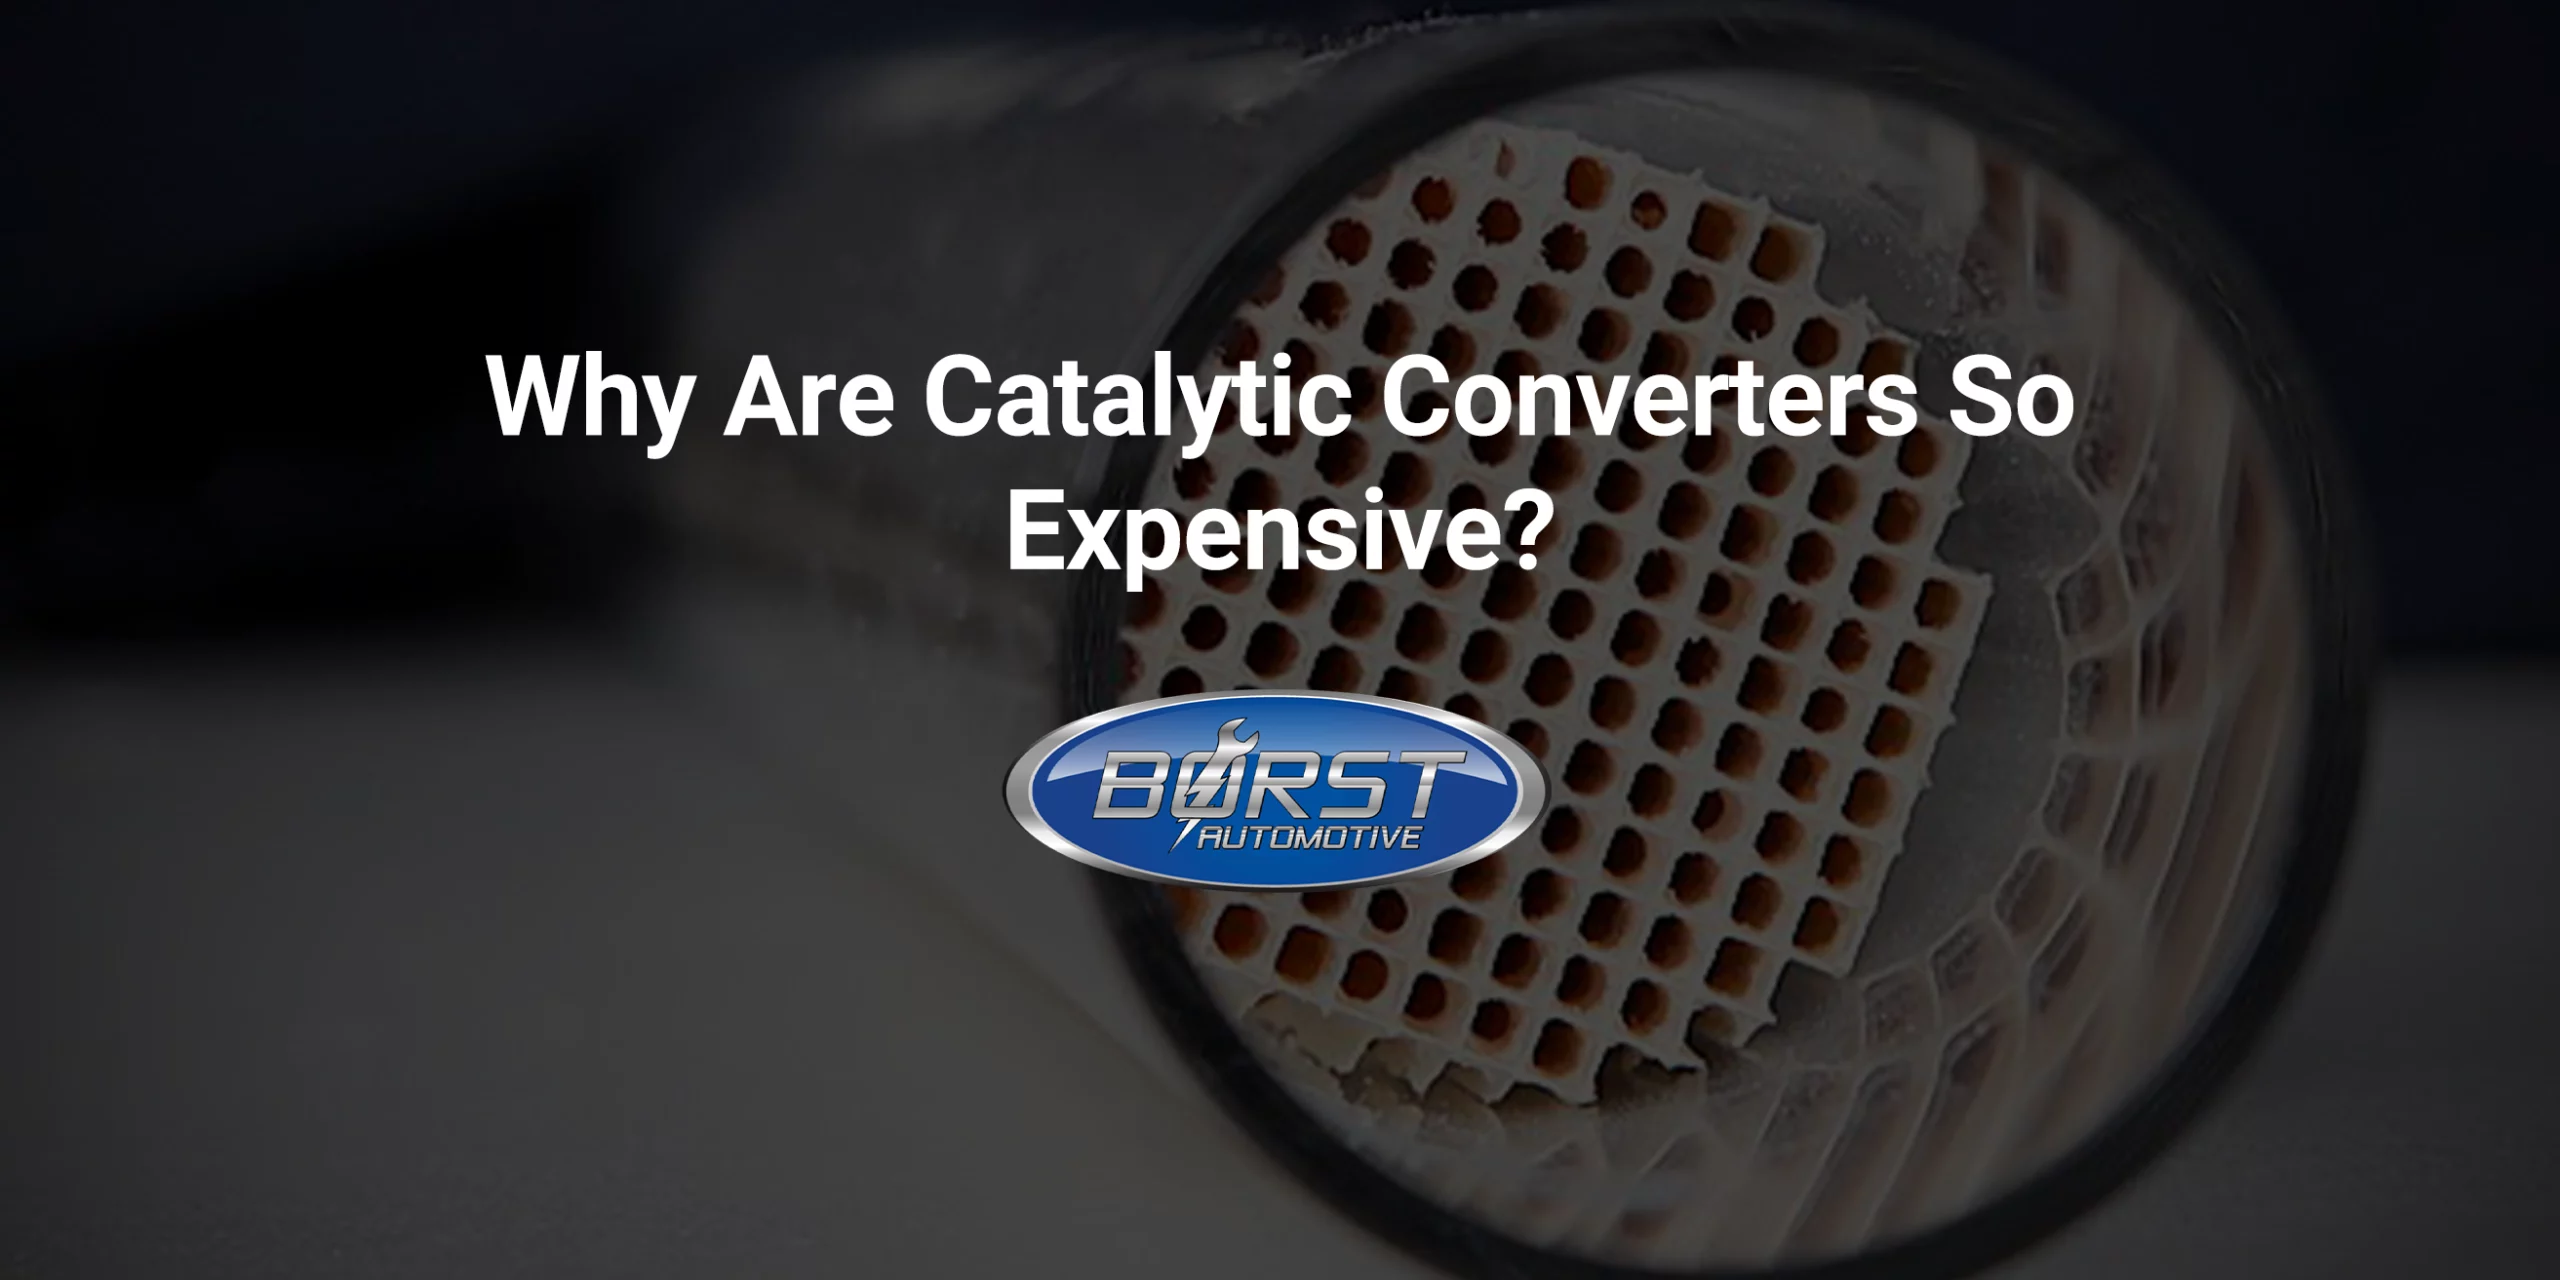 Why Are Catalytic Converters So Expensive?